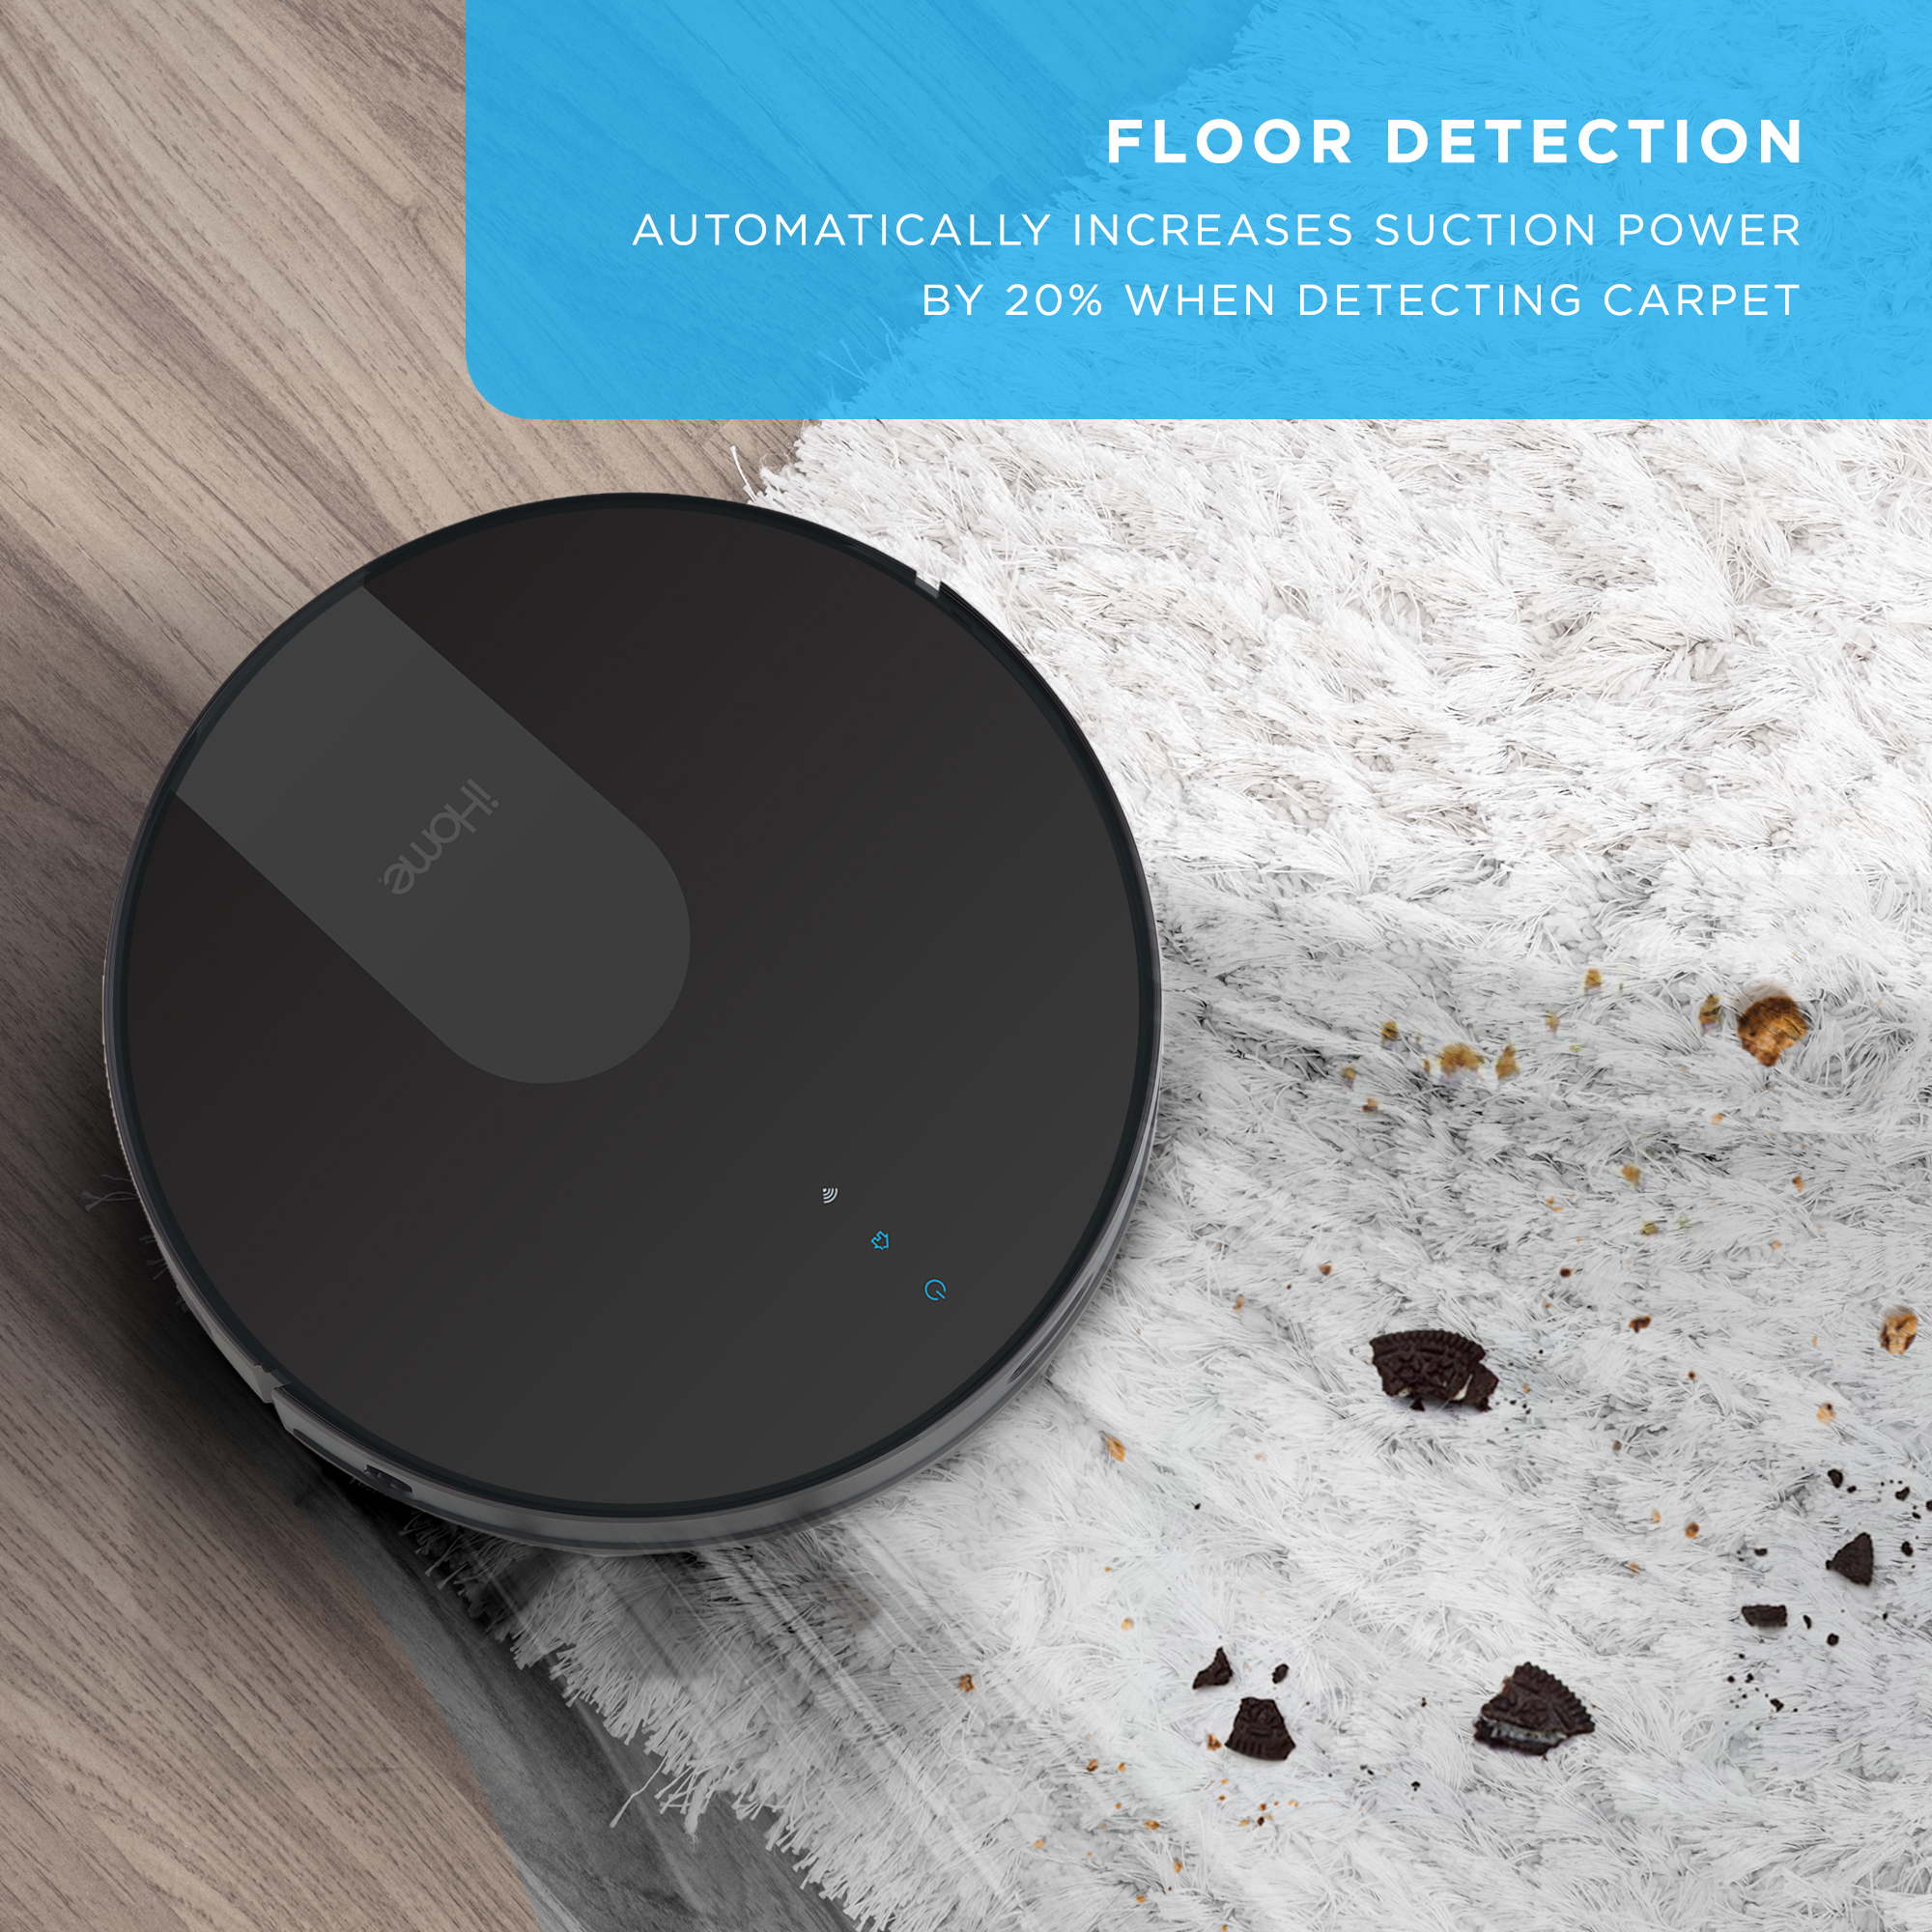 iHome AutoVac Eclipse G 2-in-1 Robot Vacuum and Mop with Homemap Navigation, Ultra Strong Suction Power, Wi-Fi/App Connectivity - image 5 of 11